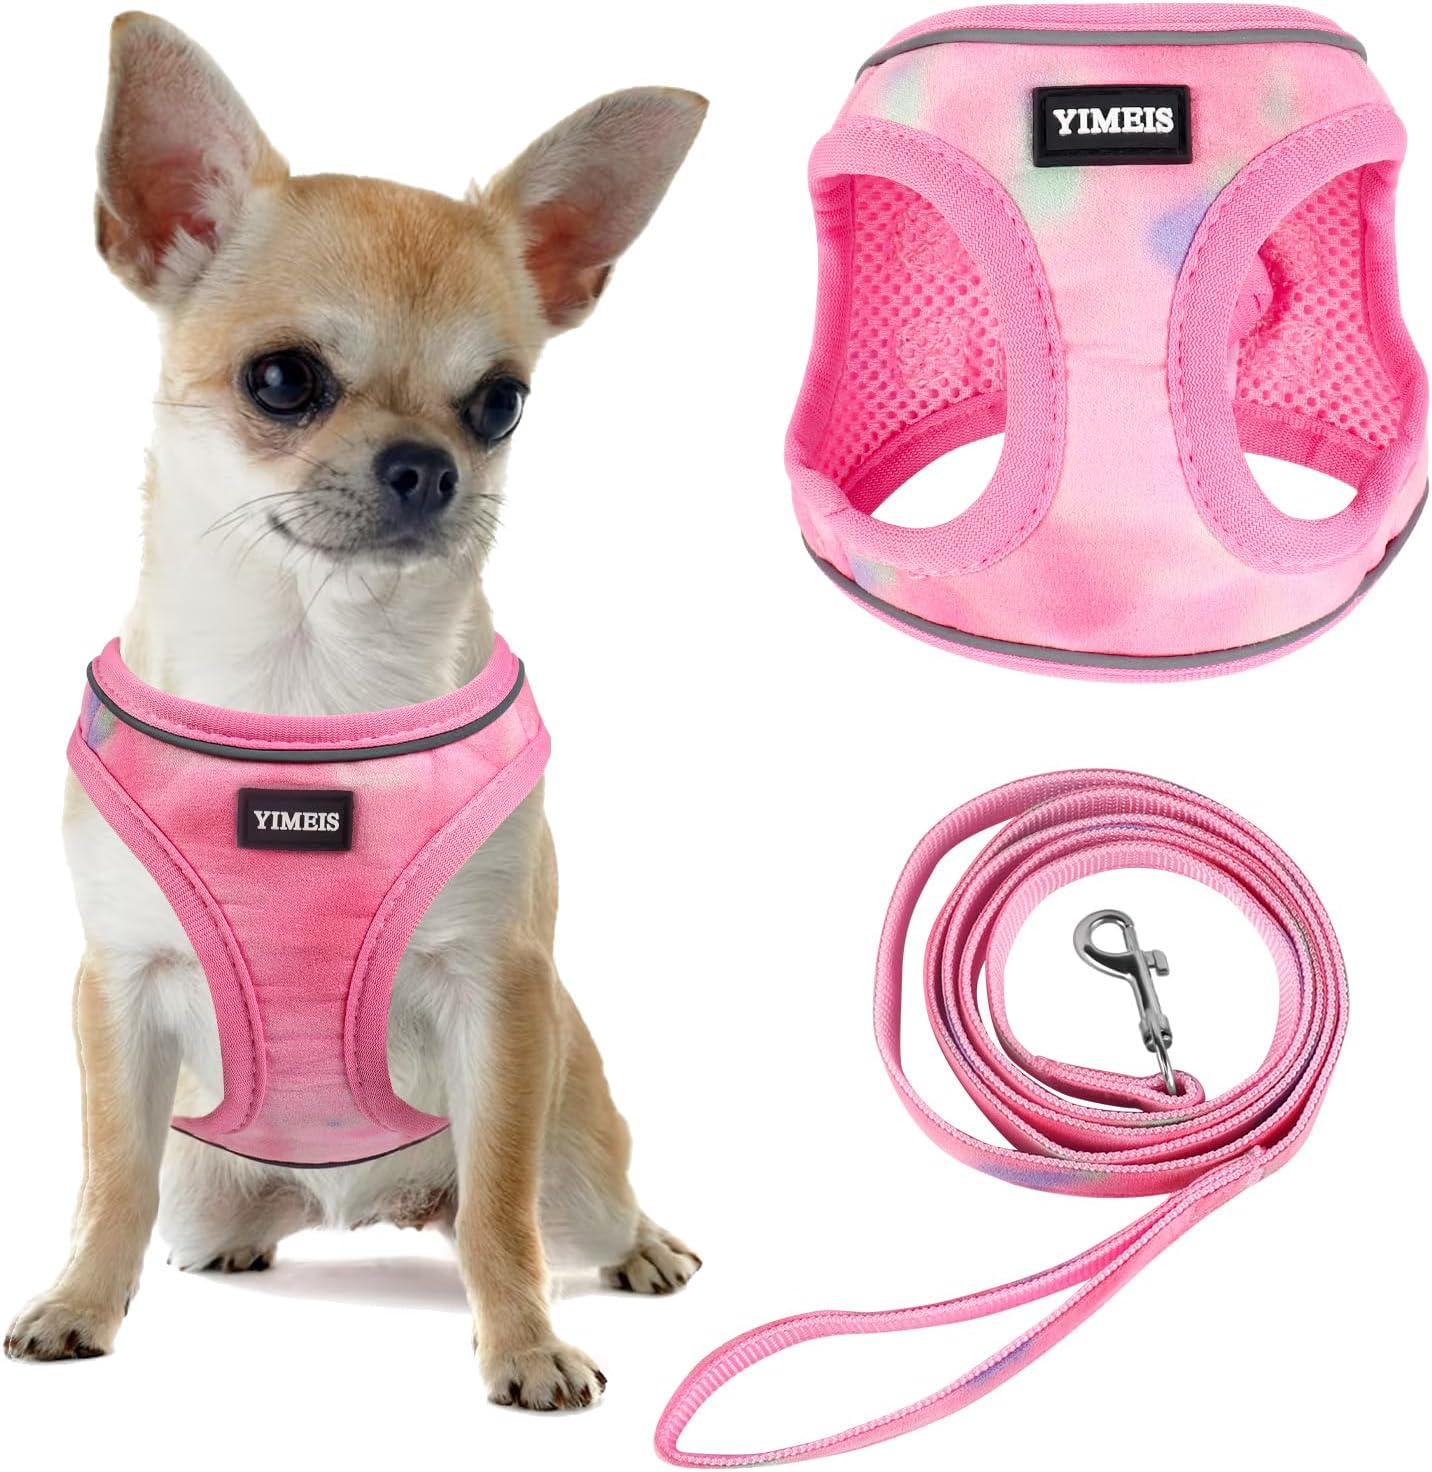 YIMEIS Dog Harness and Leash Set, No Pull Soft Mesh Pet Harness, Reflective Adjustable Puppy Vest for Small Medium Large Dogs, Cats (Tie-dye Pink, Medium (Pack of 1)